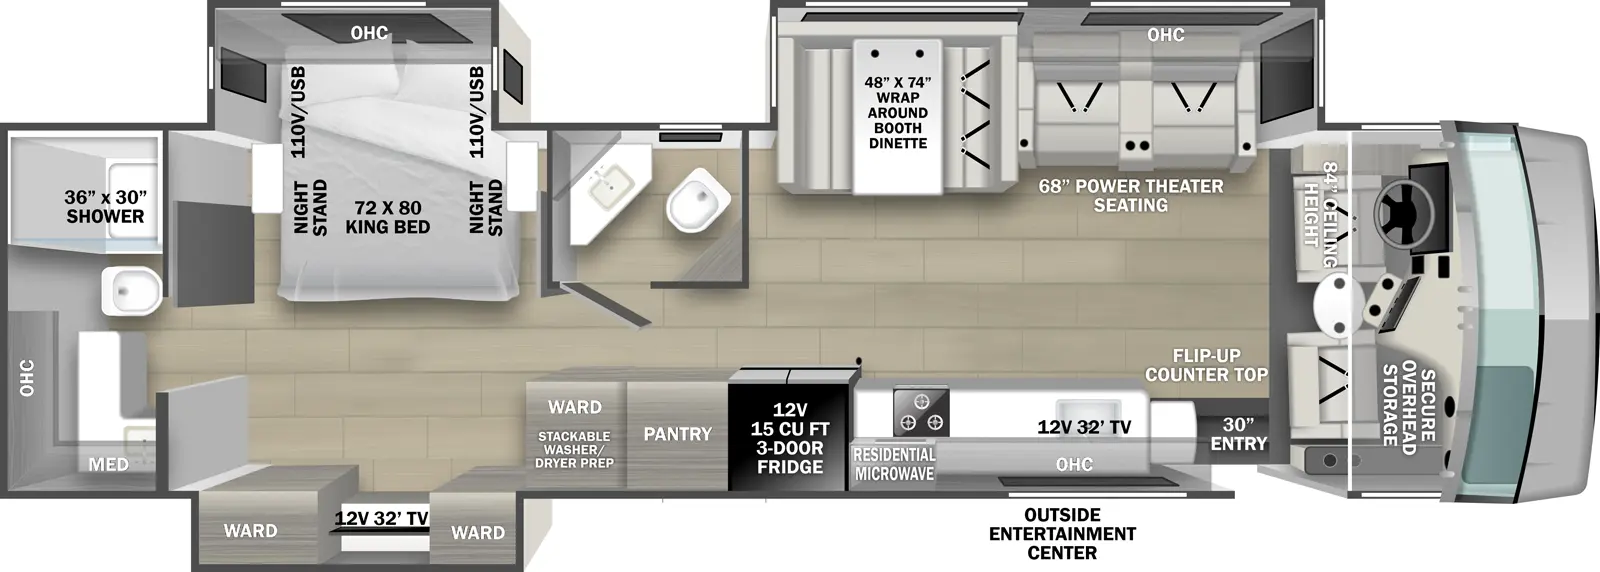 The 35G has three slideouts and one entry. Exterior features outside entertainment center. Interior layout front to back: Front cab area with 84 inch ceiling height and secure overhead storage; off-door side slideout with power theater seating, overhead cabinet, and wrap around booth dinette; door side entry, kitchen counter with flip-up counter, sink and cooktop, overhead cabinet with TV and microwave, 12 V 3-door refrigerator, pantry, and wardrobe with stackable washer/dryer prep; off-door side half bathroom; bedroom with off-door side king bed slideout with overhead cabinet and nightstands on each side, and door side slideout with 12V TV with wardrobes on each side; rear full bathroom with overhead cabinet and medicine cabinet.